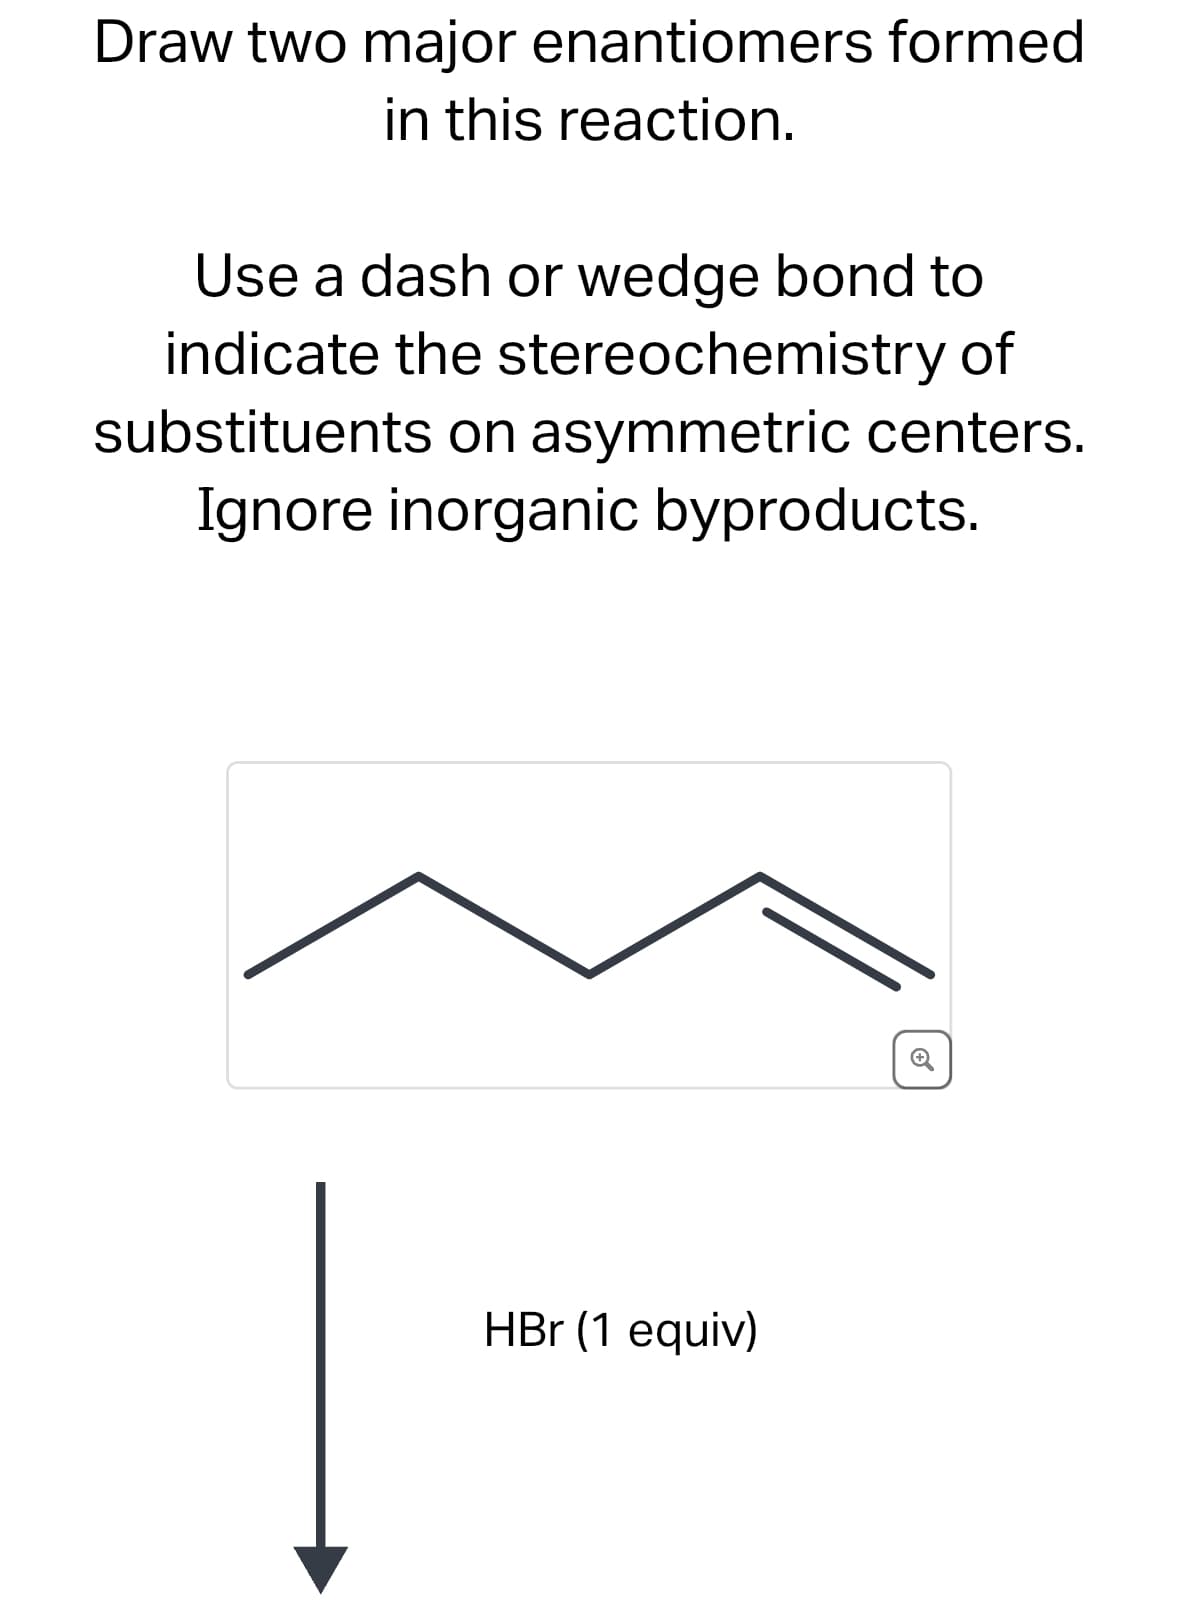 Draw two major enantiomers formed
in this reaction.
Use a dash or wedge bond to
indicate the stereochemistry of
substituents on asymmetric centers.
Ignore inorganic byproducts.
HBr (1 equiv)
Ⓒ